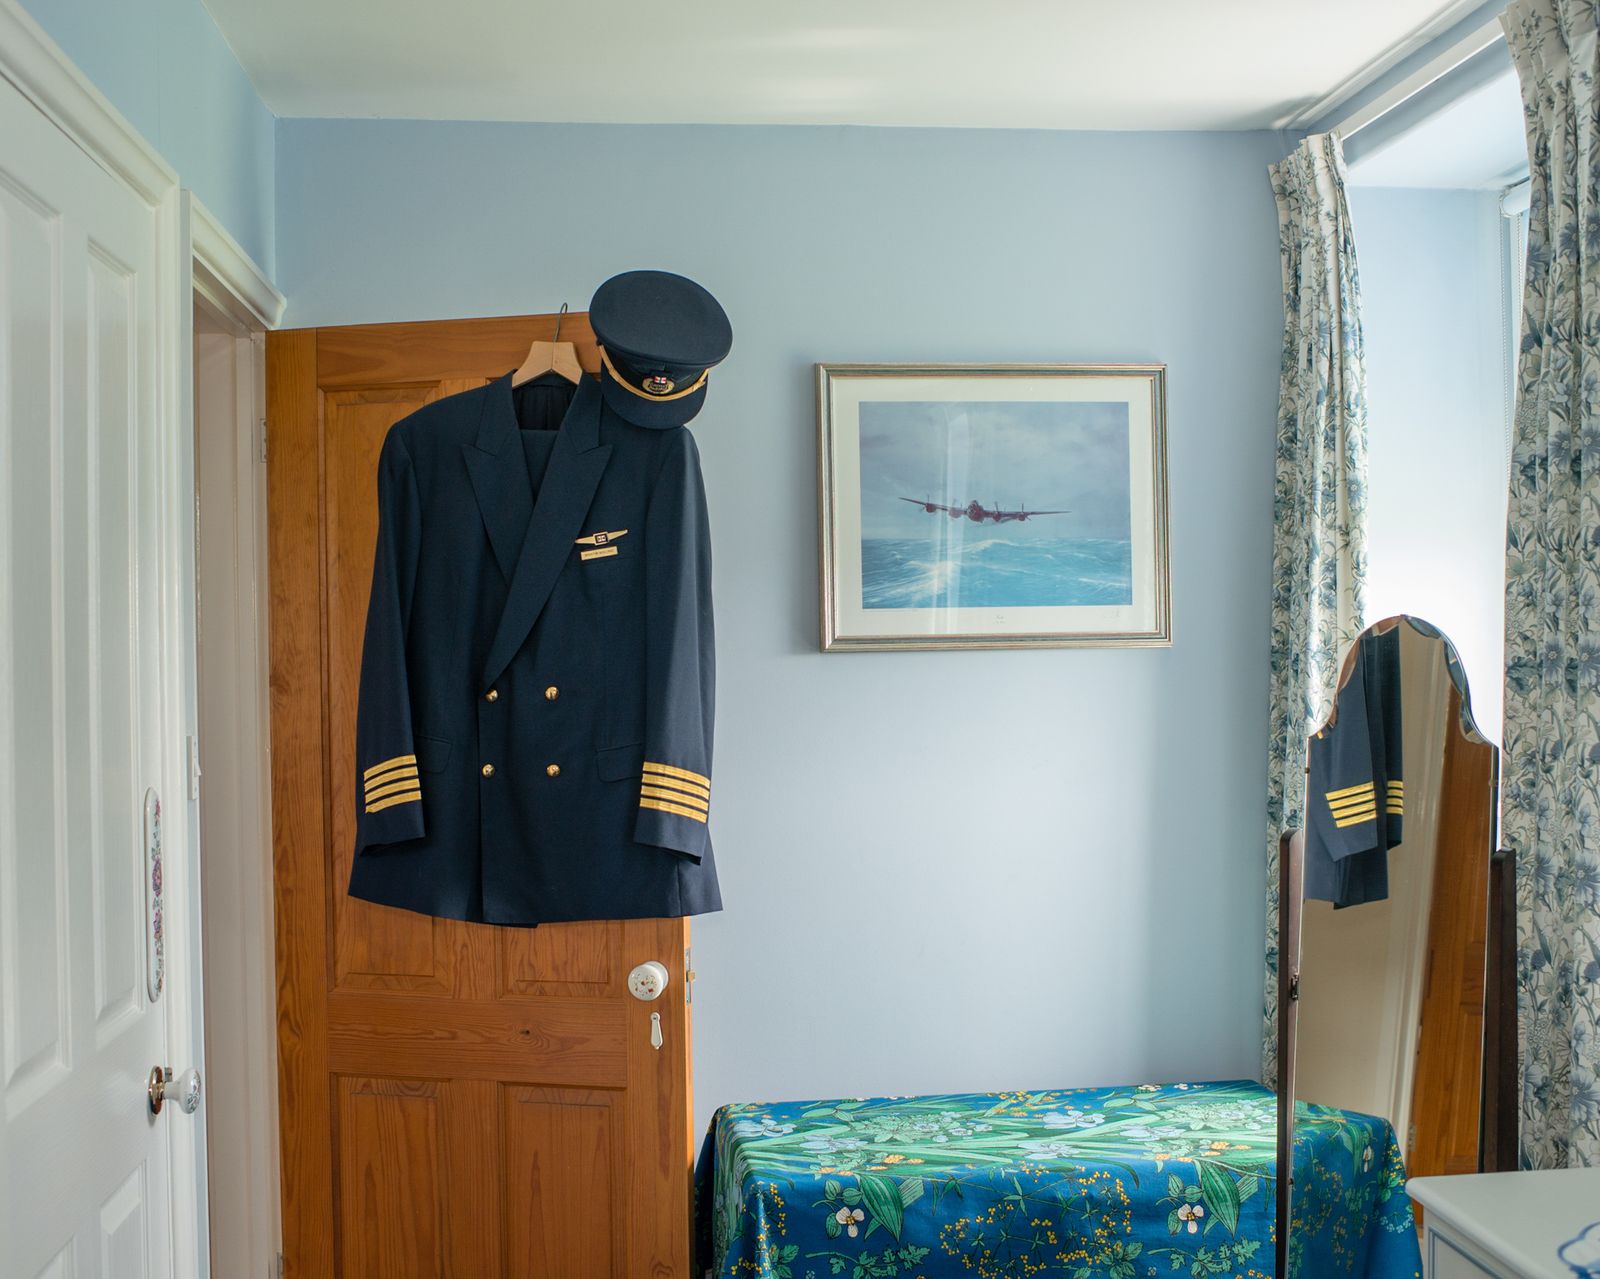 © Martin Toft - Captain’s Uniform, Martin Willing, St Peter, Jersey, Channel Islands, 31 May 2014